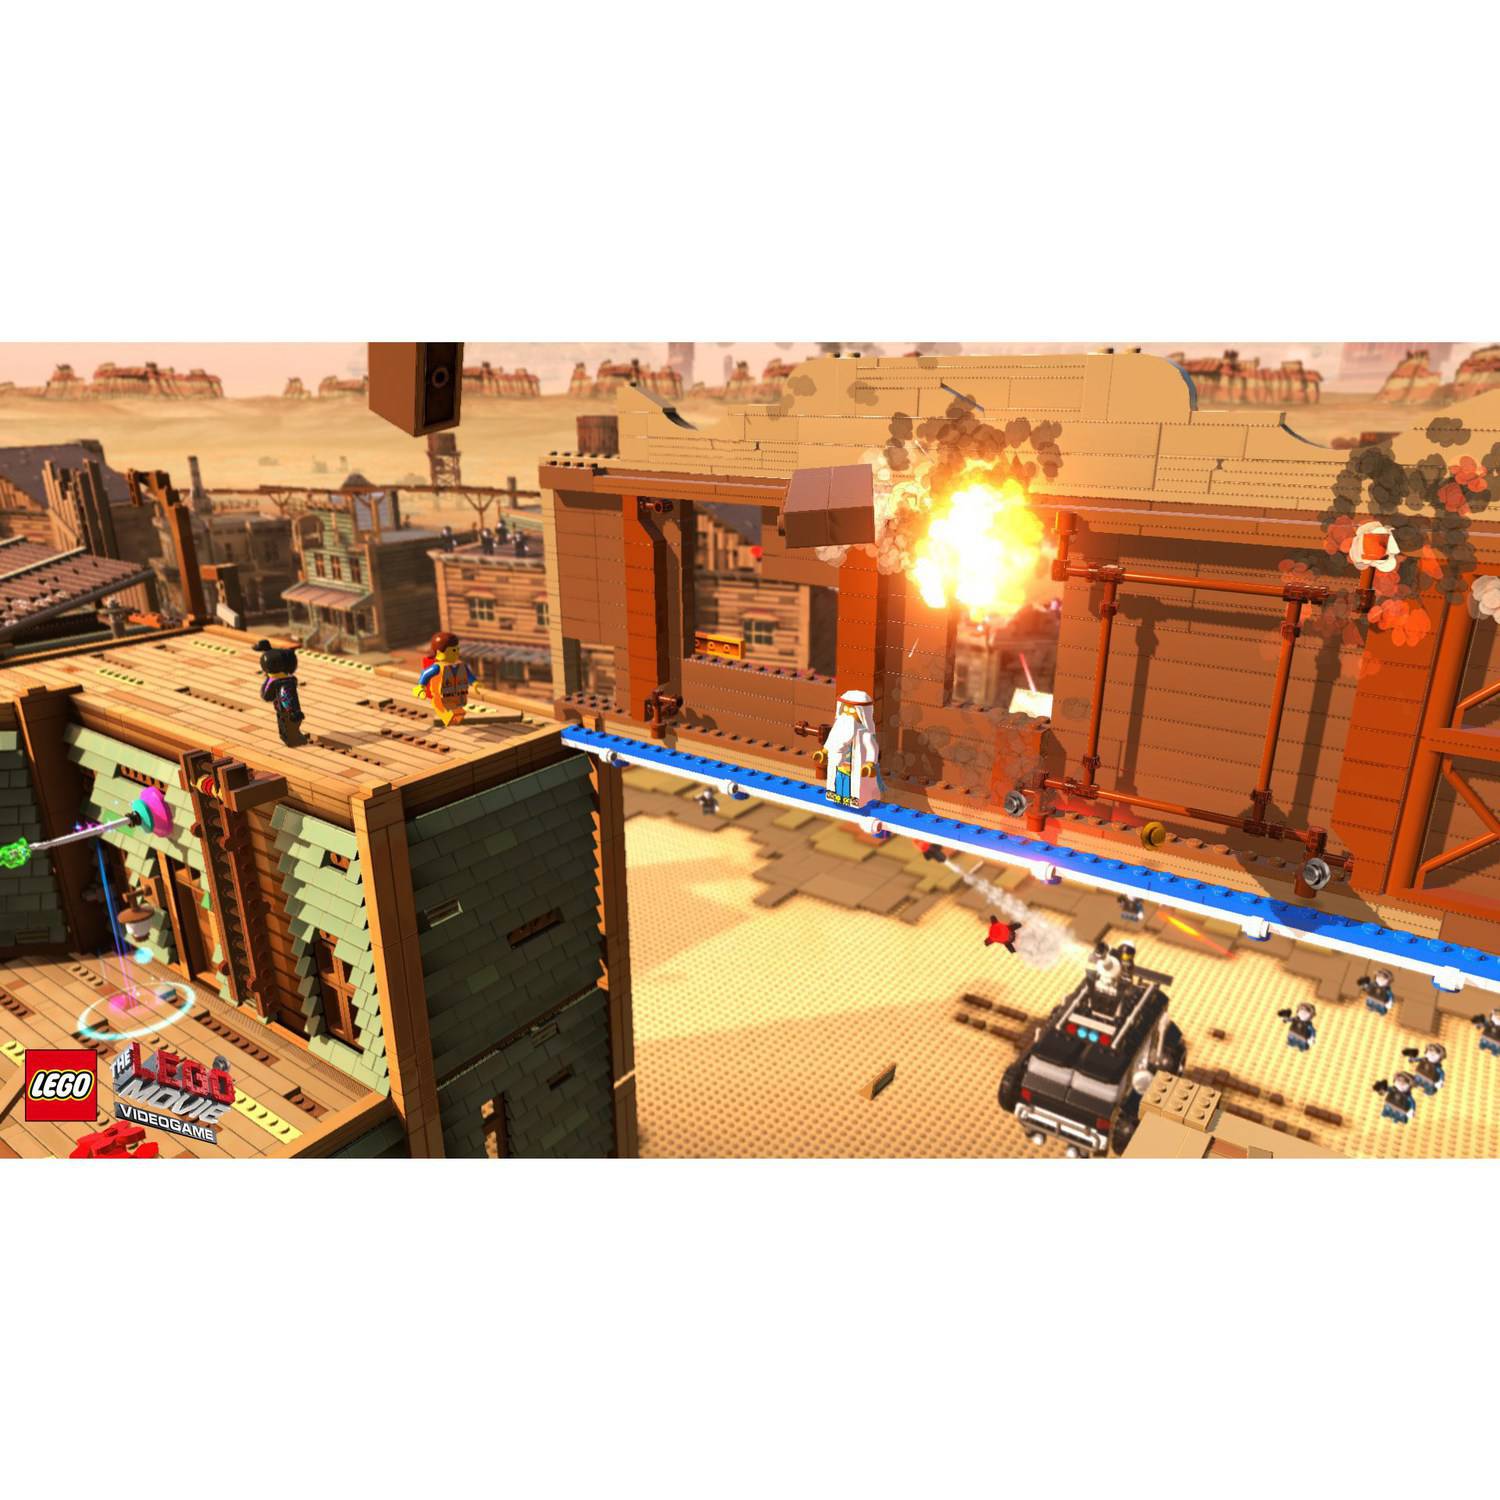 The LEGO Movie Videogame - PlayStation 4 - image 3 of 8